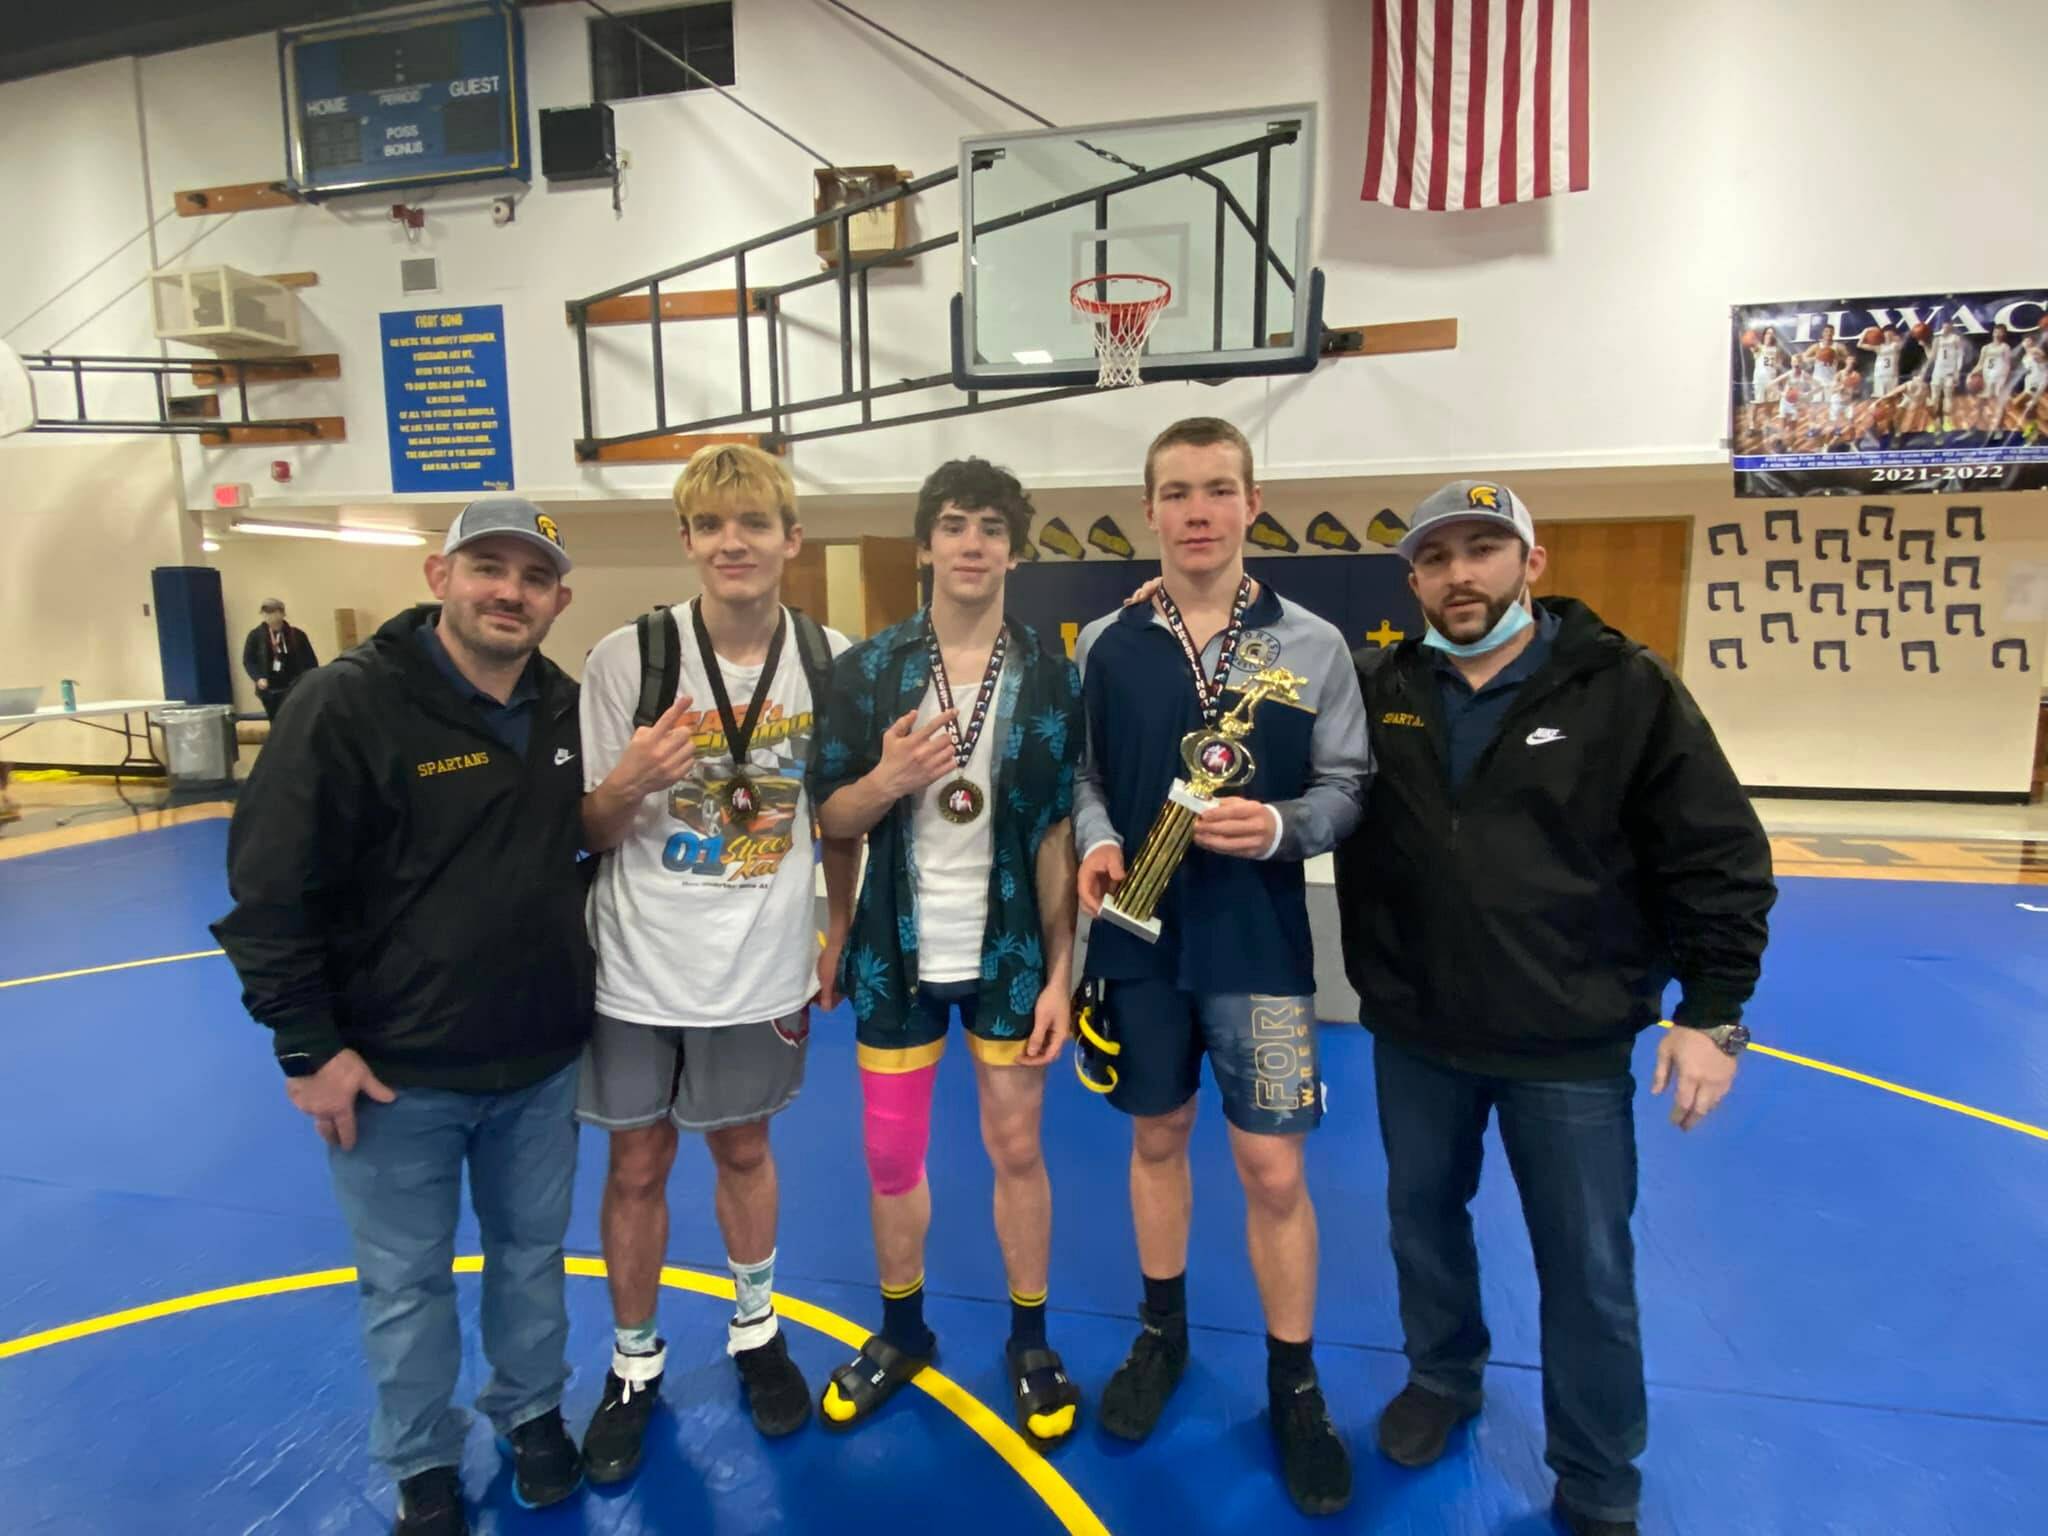 Individual Champs with coaches left to right: Coach Weakley, Jake Weakley 152 lbs, Walker Rondeau 132 lbs, Nate Dahlgren 170 lbs, and Coach Fishkorn.